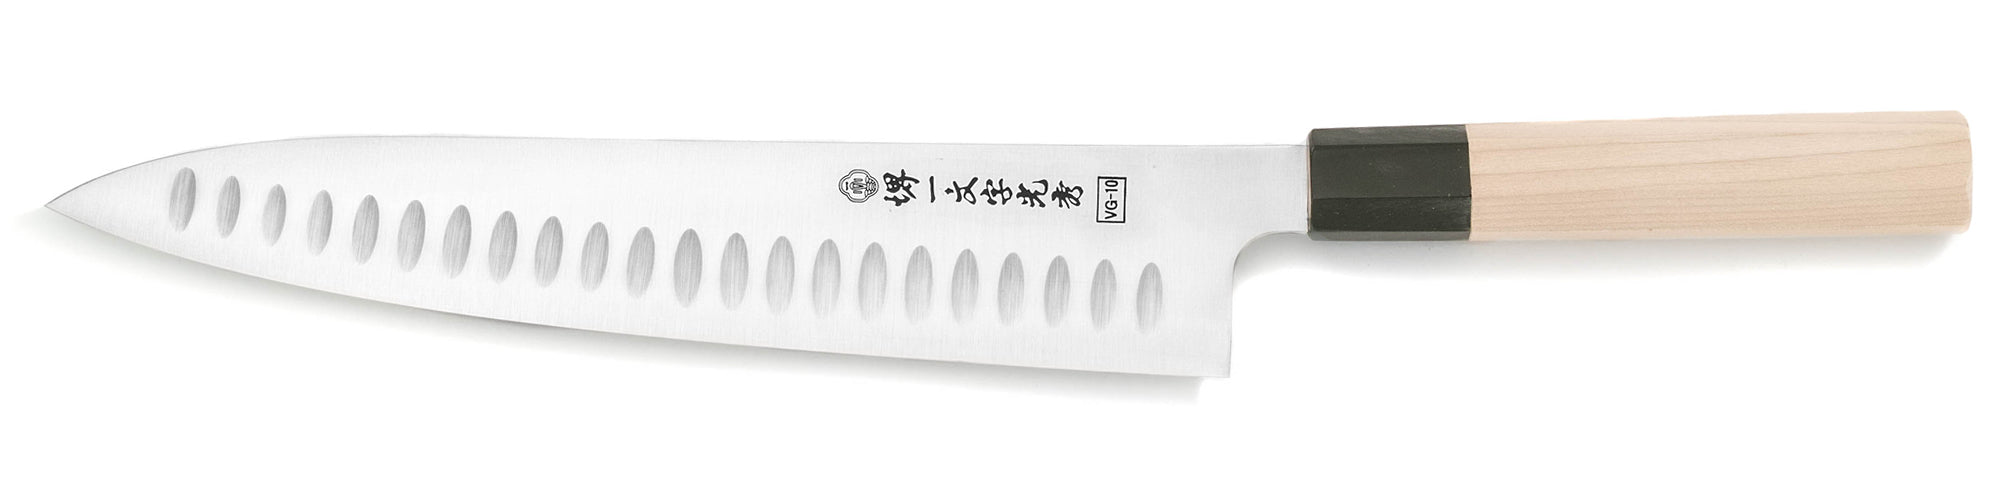 VG-10 Dimple WaGyuto(Chef Knife) 270mm